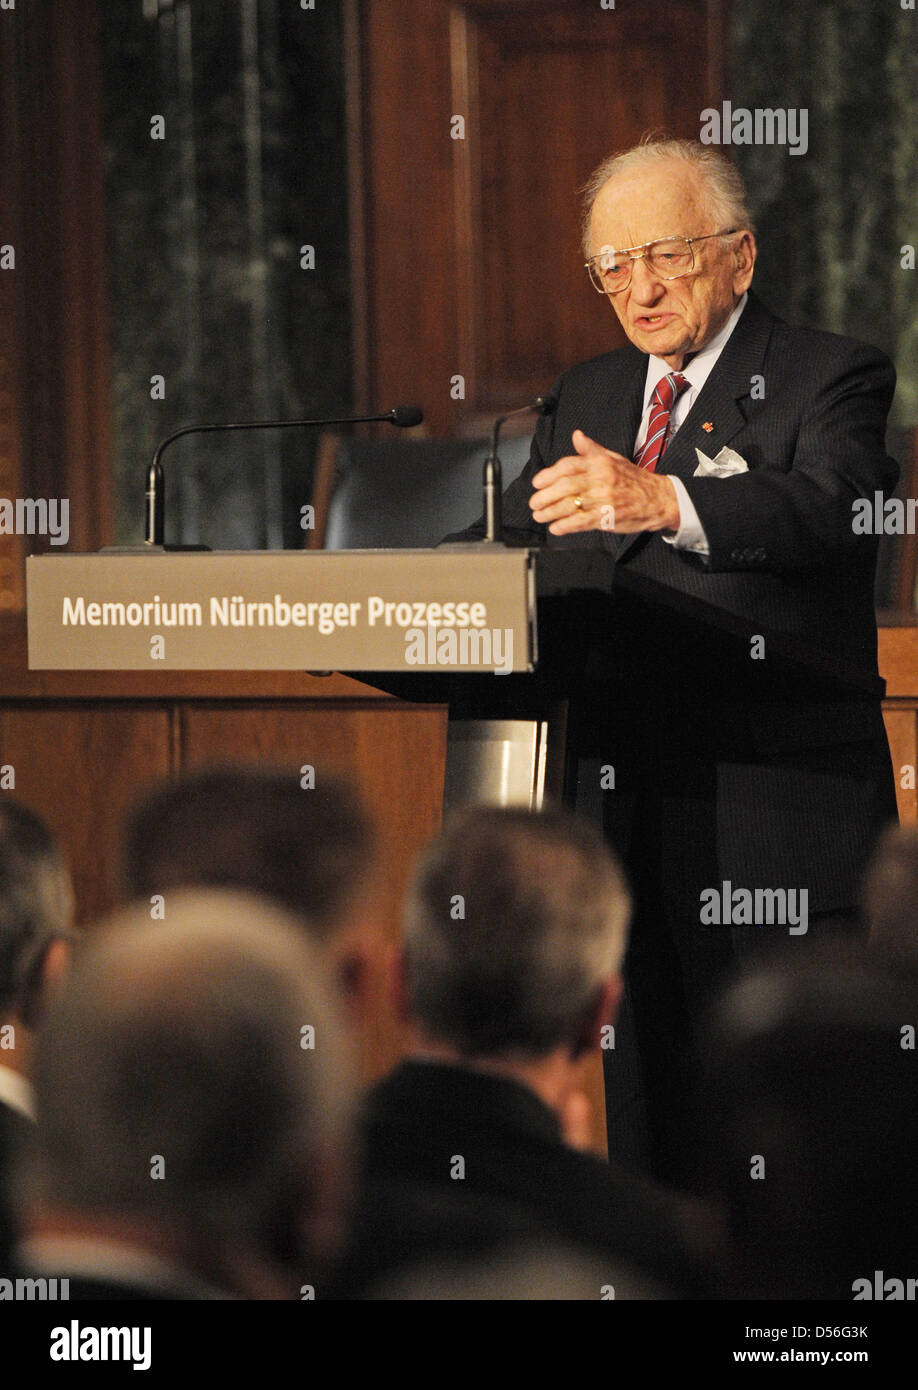 Former chief prosecutor of the Einsatzgruppen Trial Benjamin Ferencz speaks at the opening of the 'Nuremberg Trials Memorium' at the regional court Nuremberg-Fuerth in Nuremberg, Germany, 21 November 2010. The Nuremberg Trials were held in Room 600 of the state court, which has now been turned into a museum. Photo: ARMIN WEIGEL Stock Photo